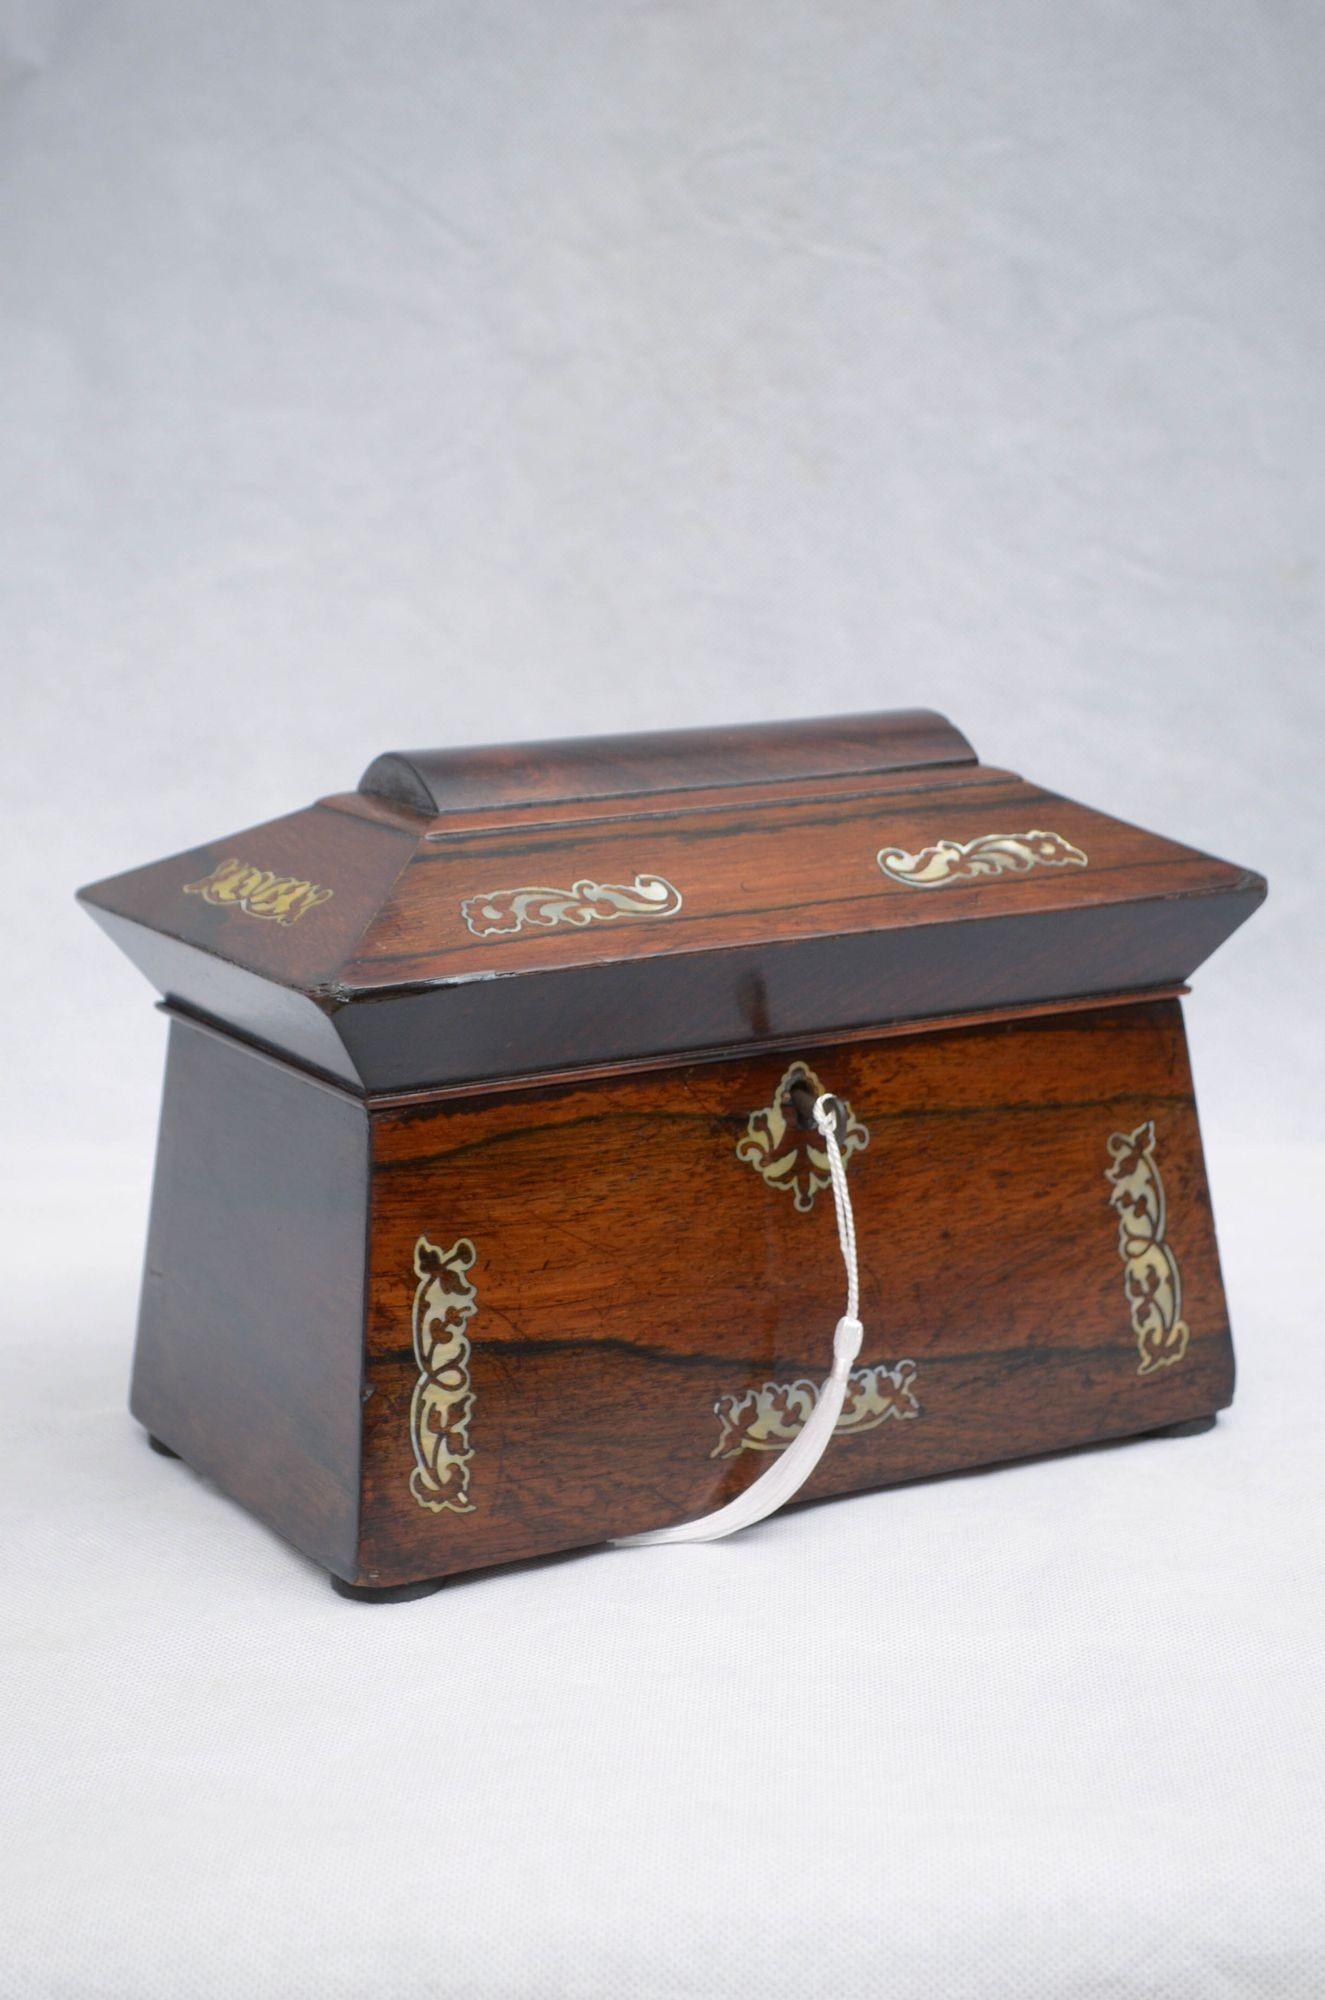 P0241 Attractive rosewood jewellery box with mother of pearl inlays, lined interior and original working lock with a key. This antique box is in home ready condition. UK mainland delivery included. c1820
H6.5